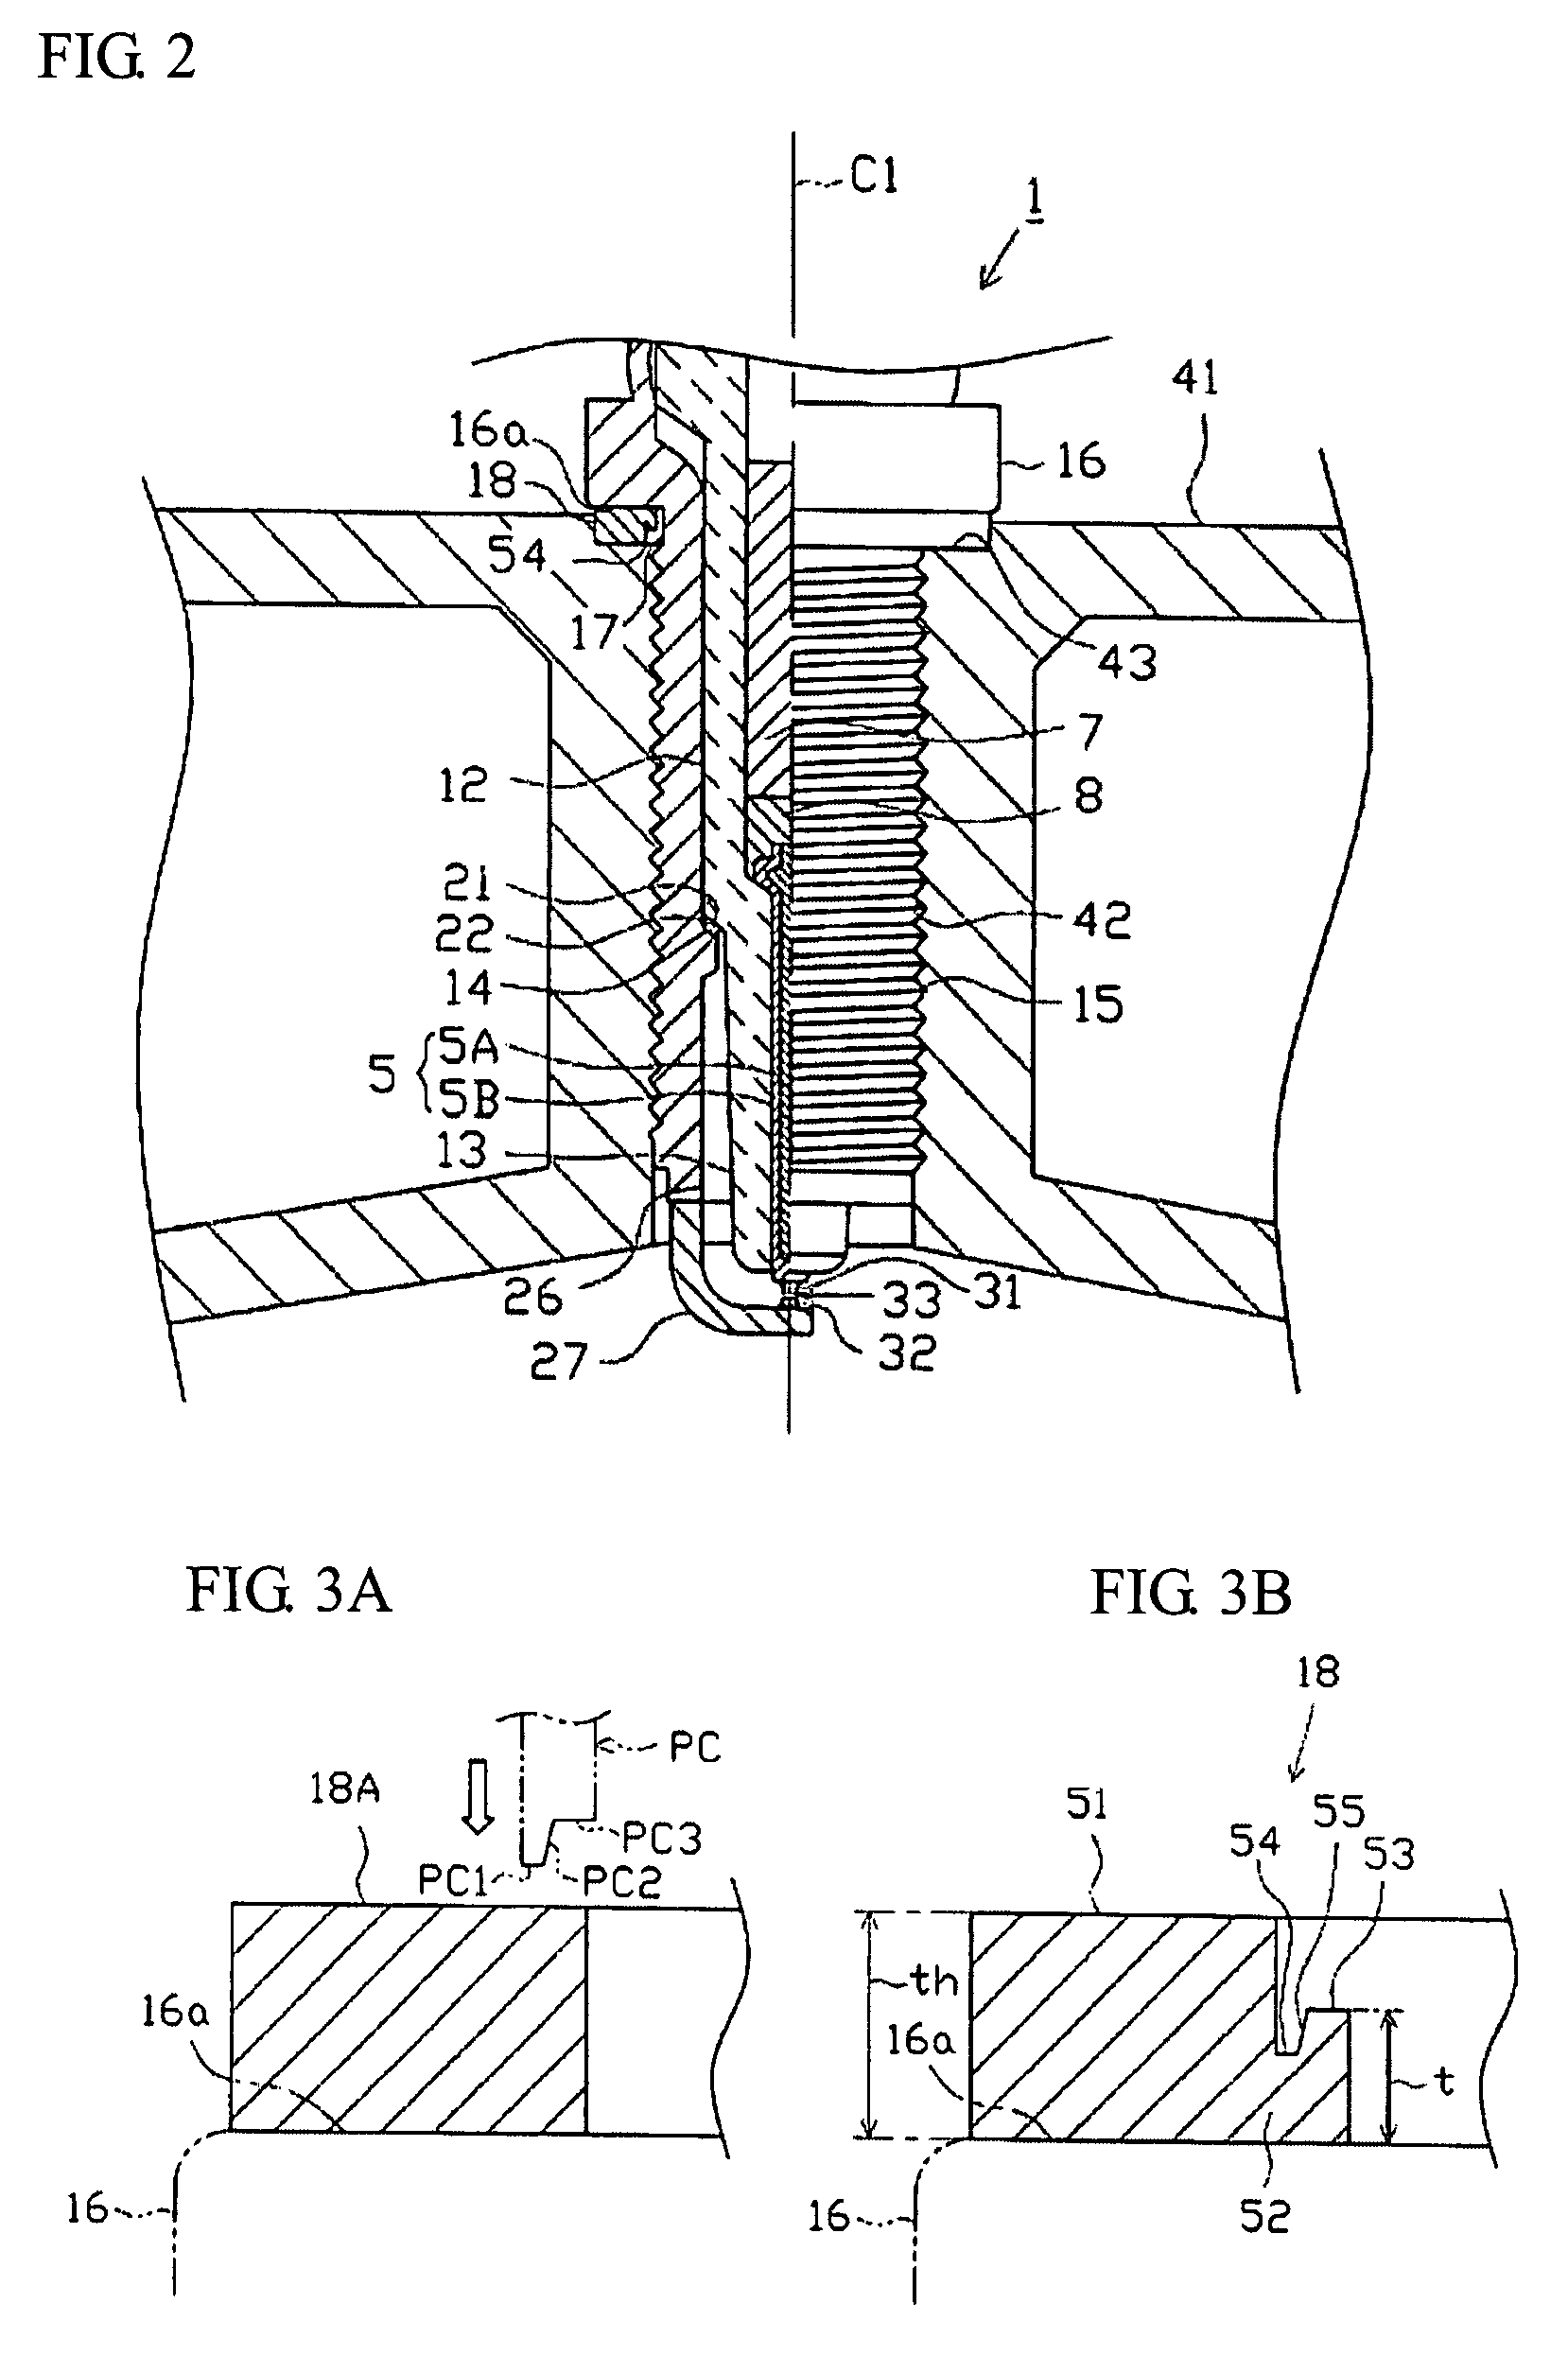 Spark plug for internal combustion engine and method of manufacturing the same